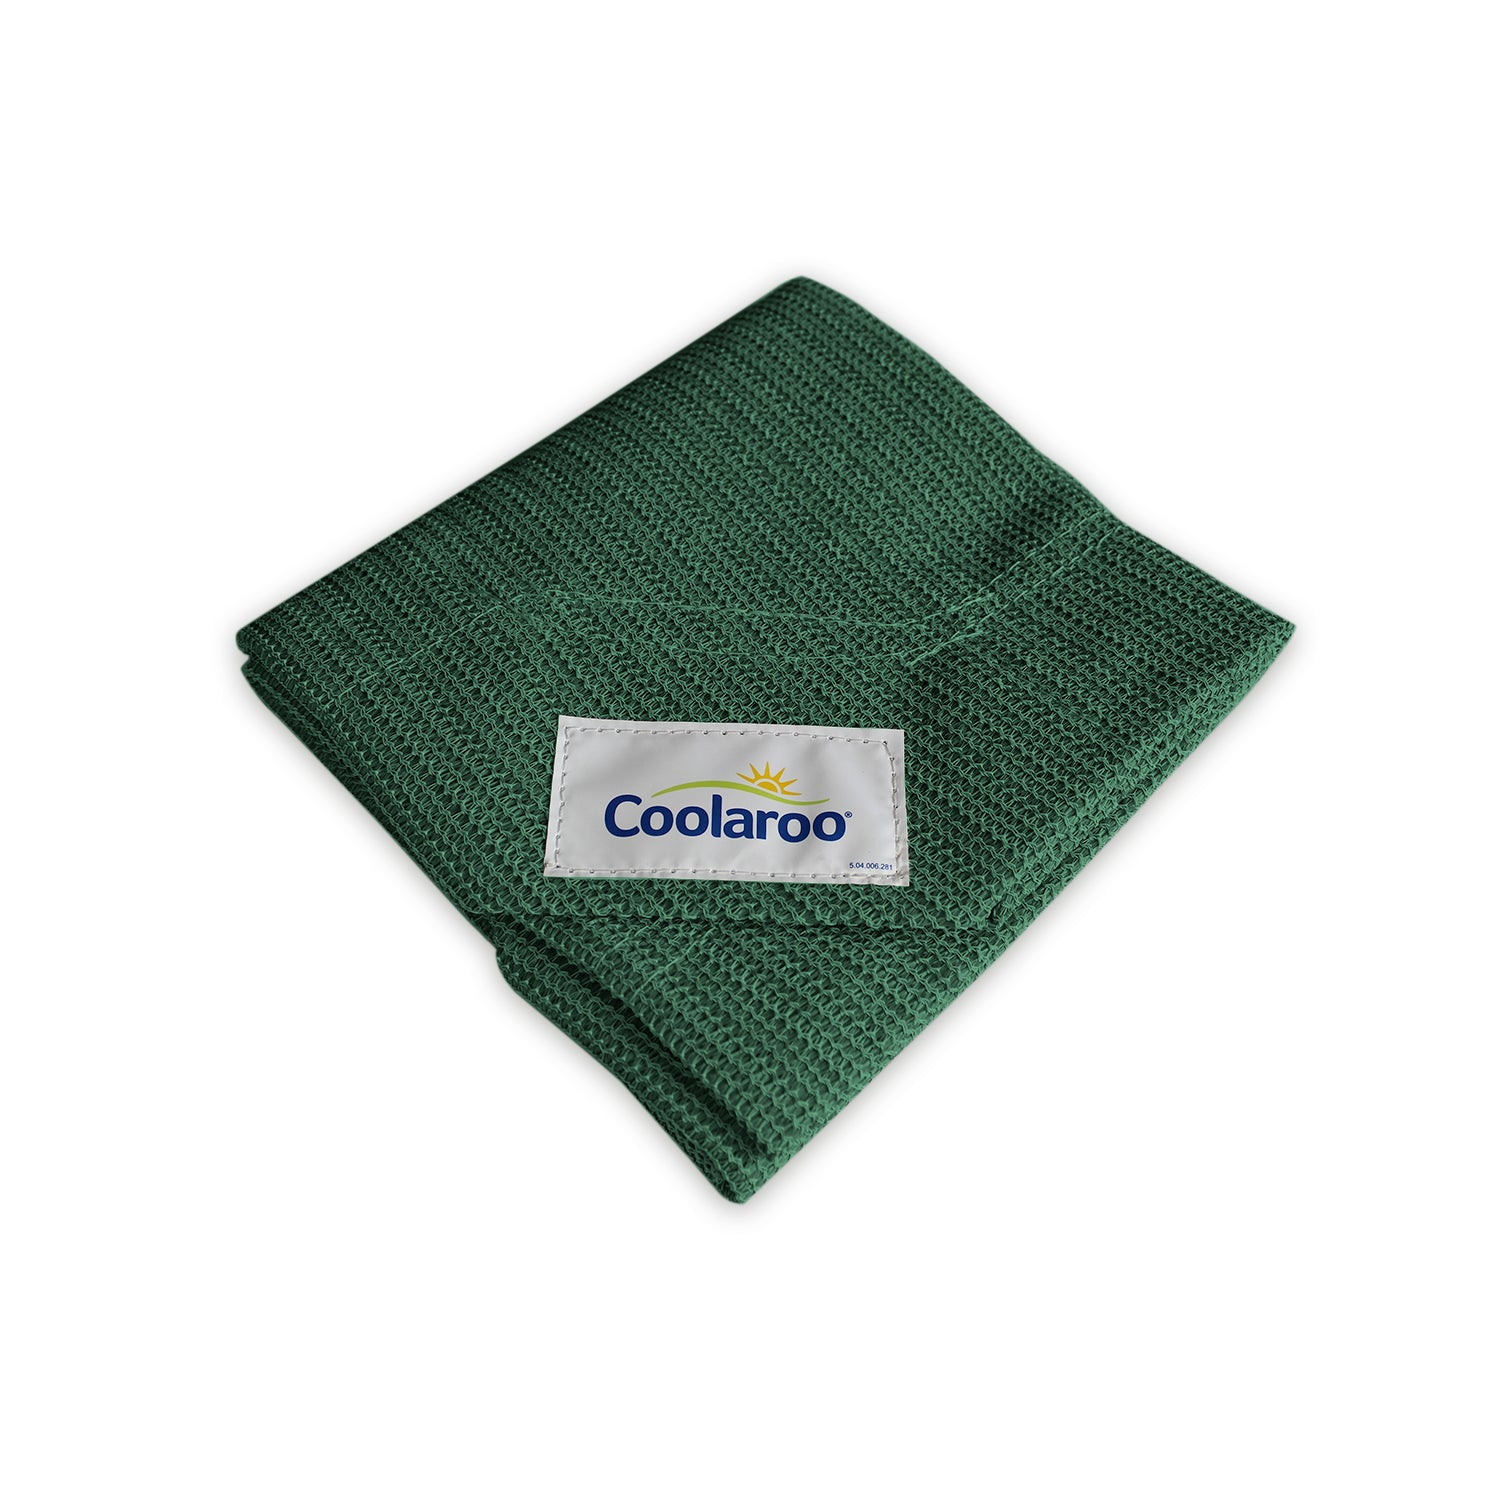 The Original Coolaroo Elevated Pet Dog Bed Replacement Cover， Small， Brunswick Green